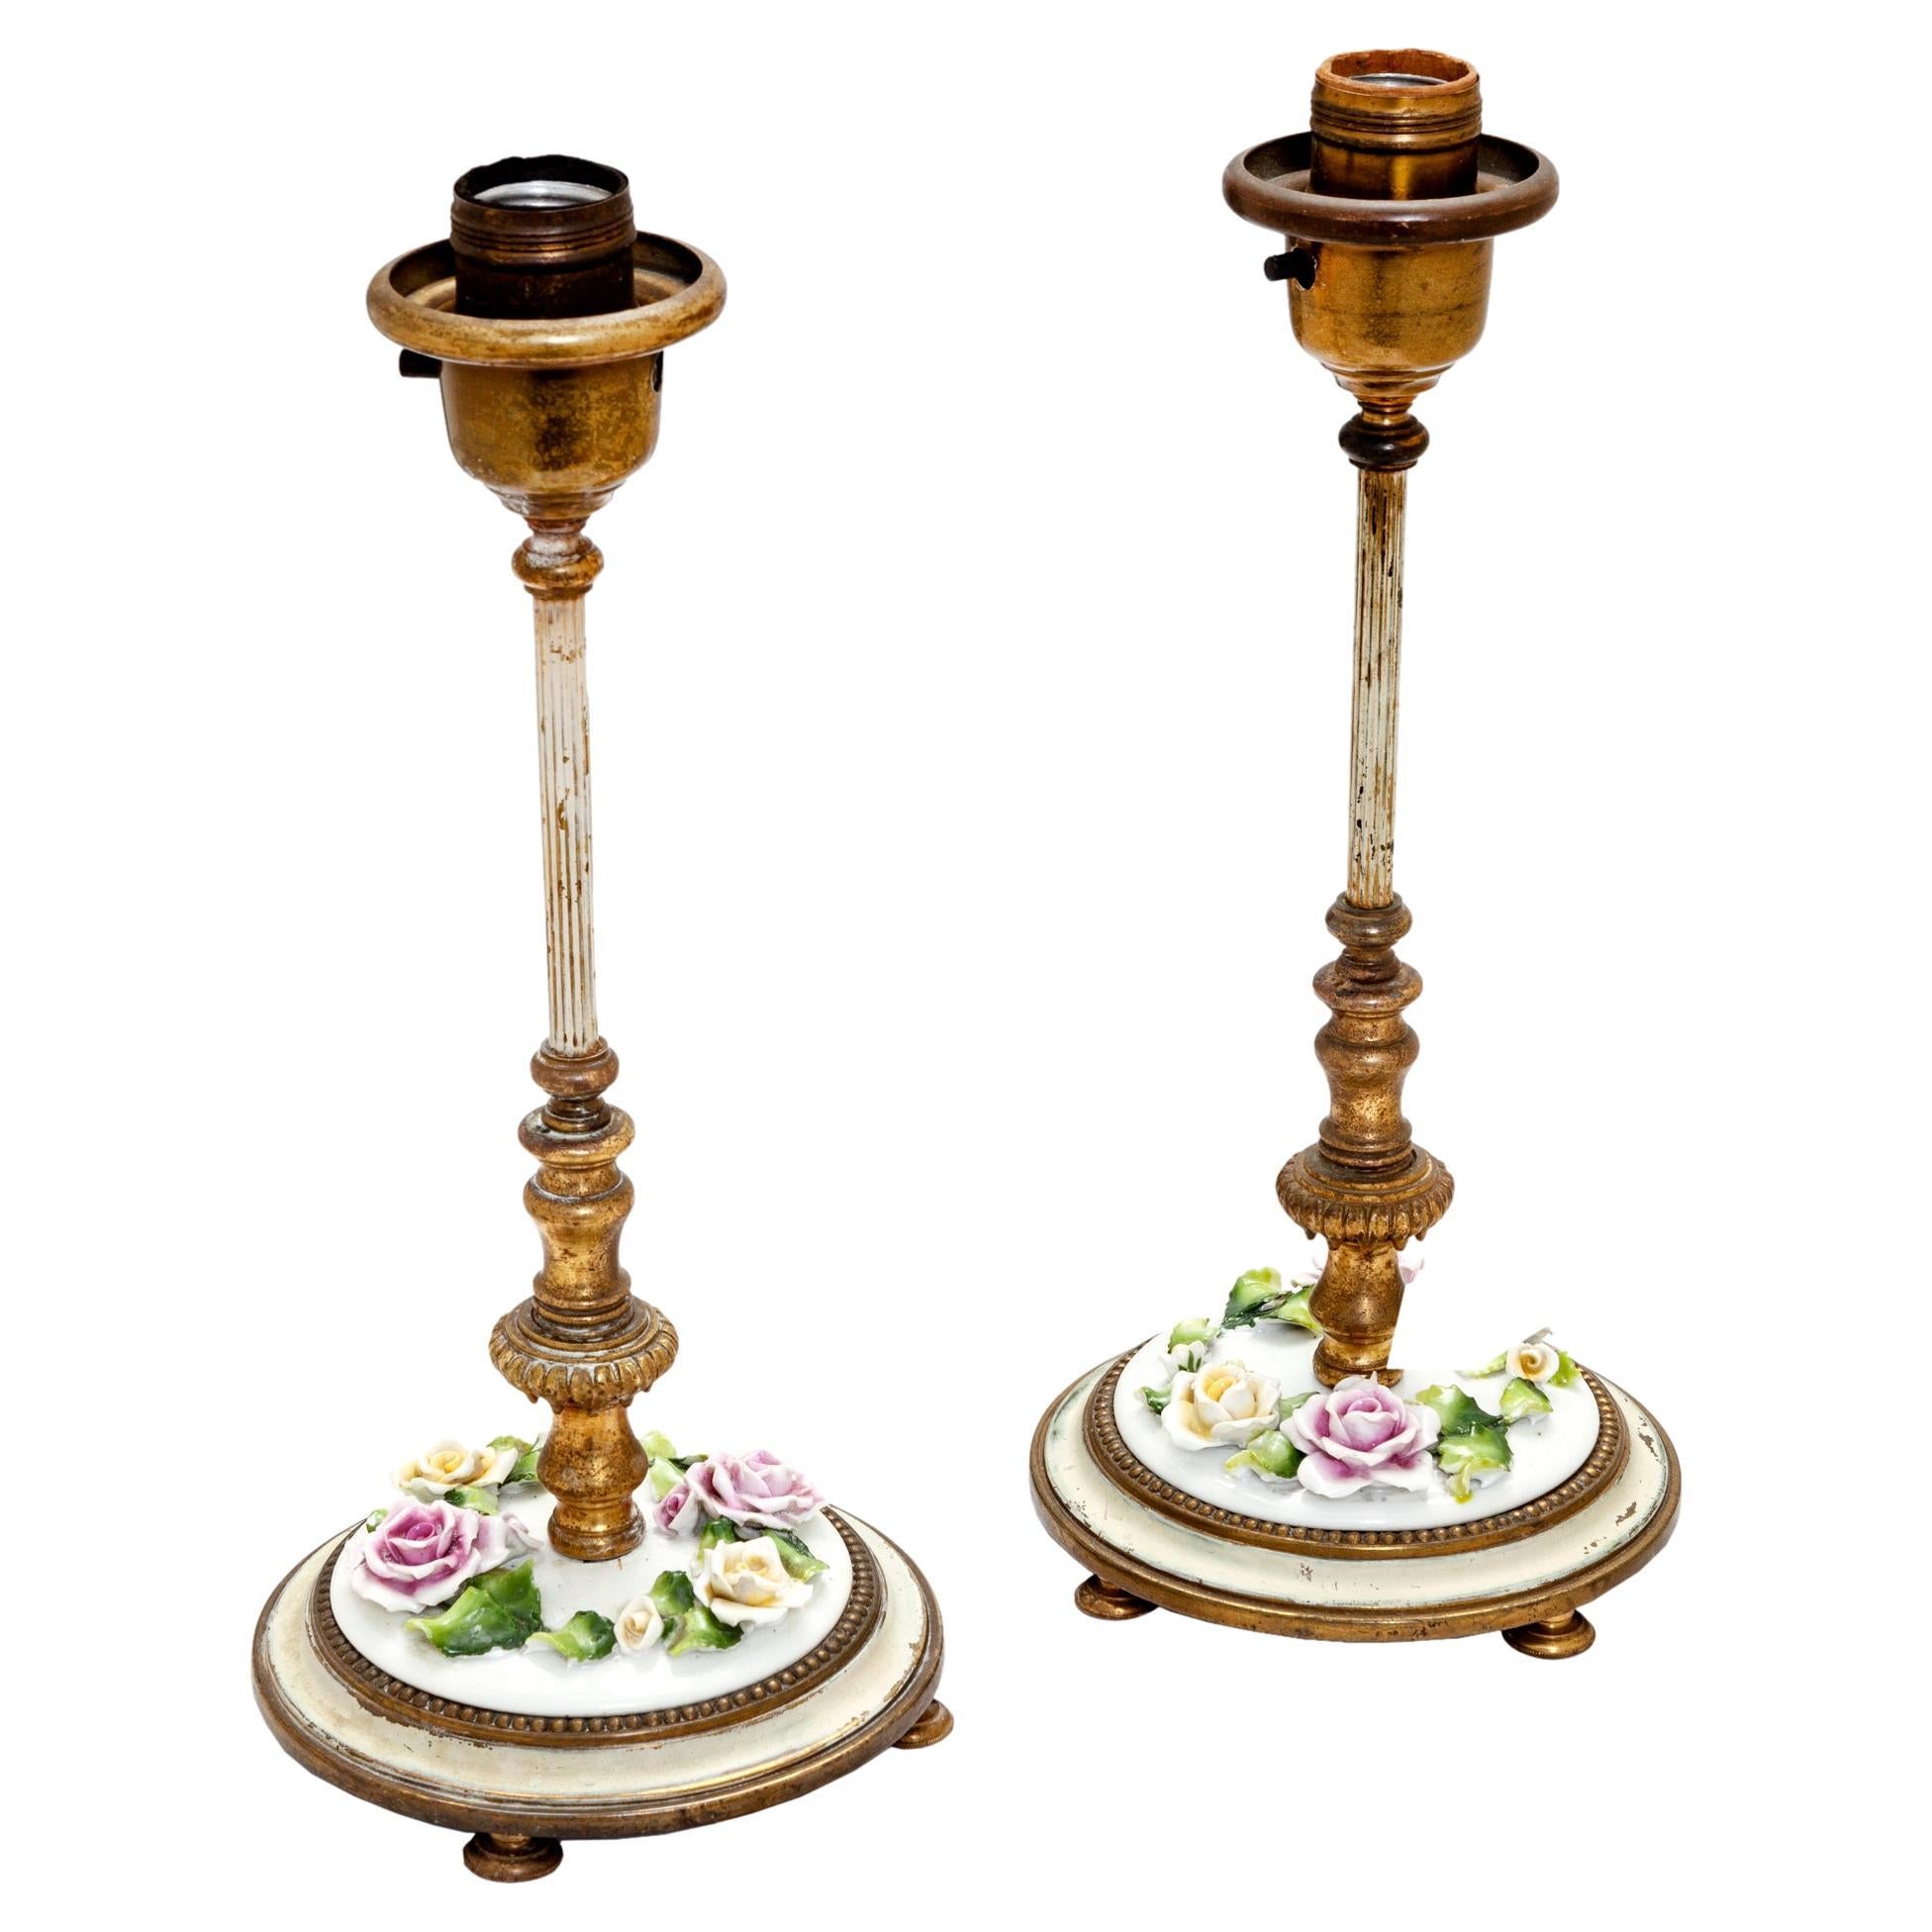 German Footed Candlestick Vanity Lamps with Porcelain Flowers; a Pair